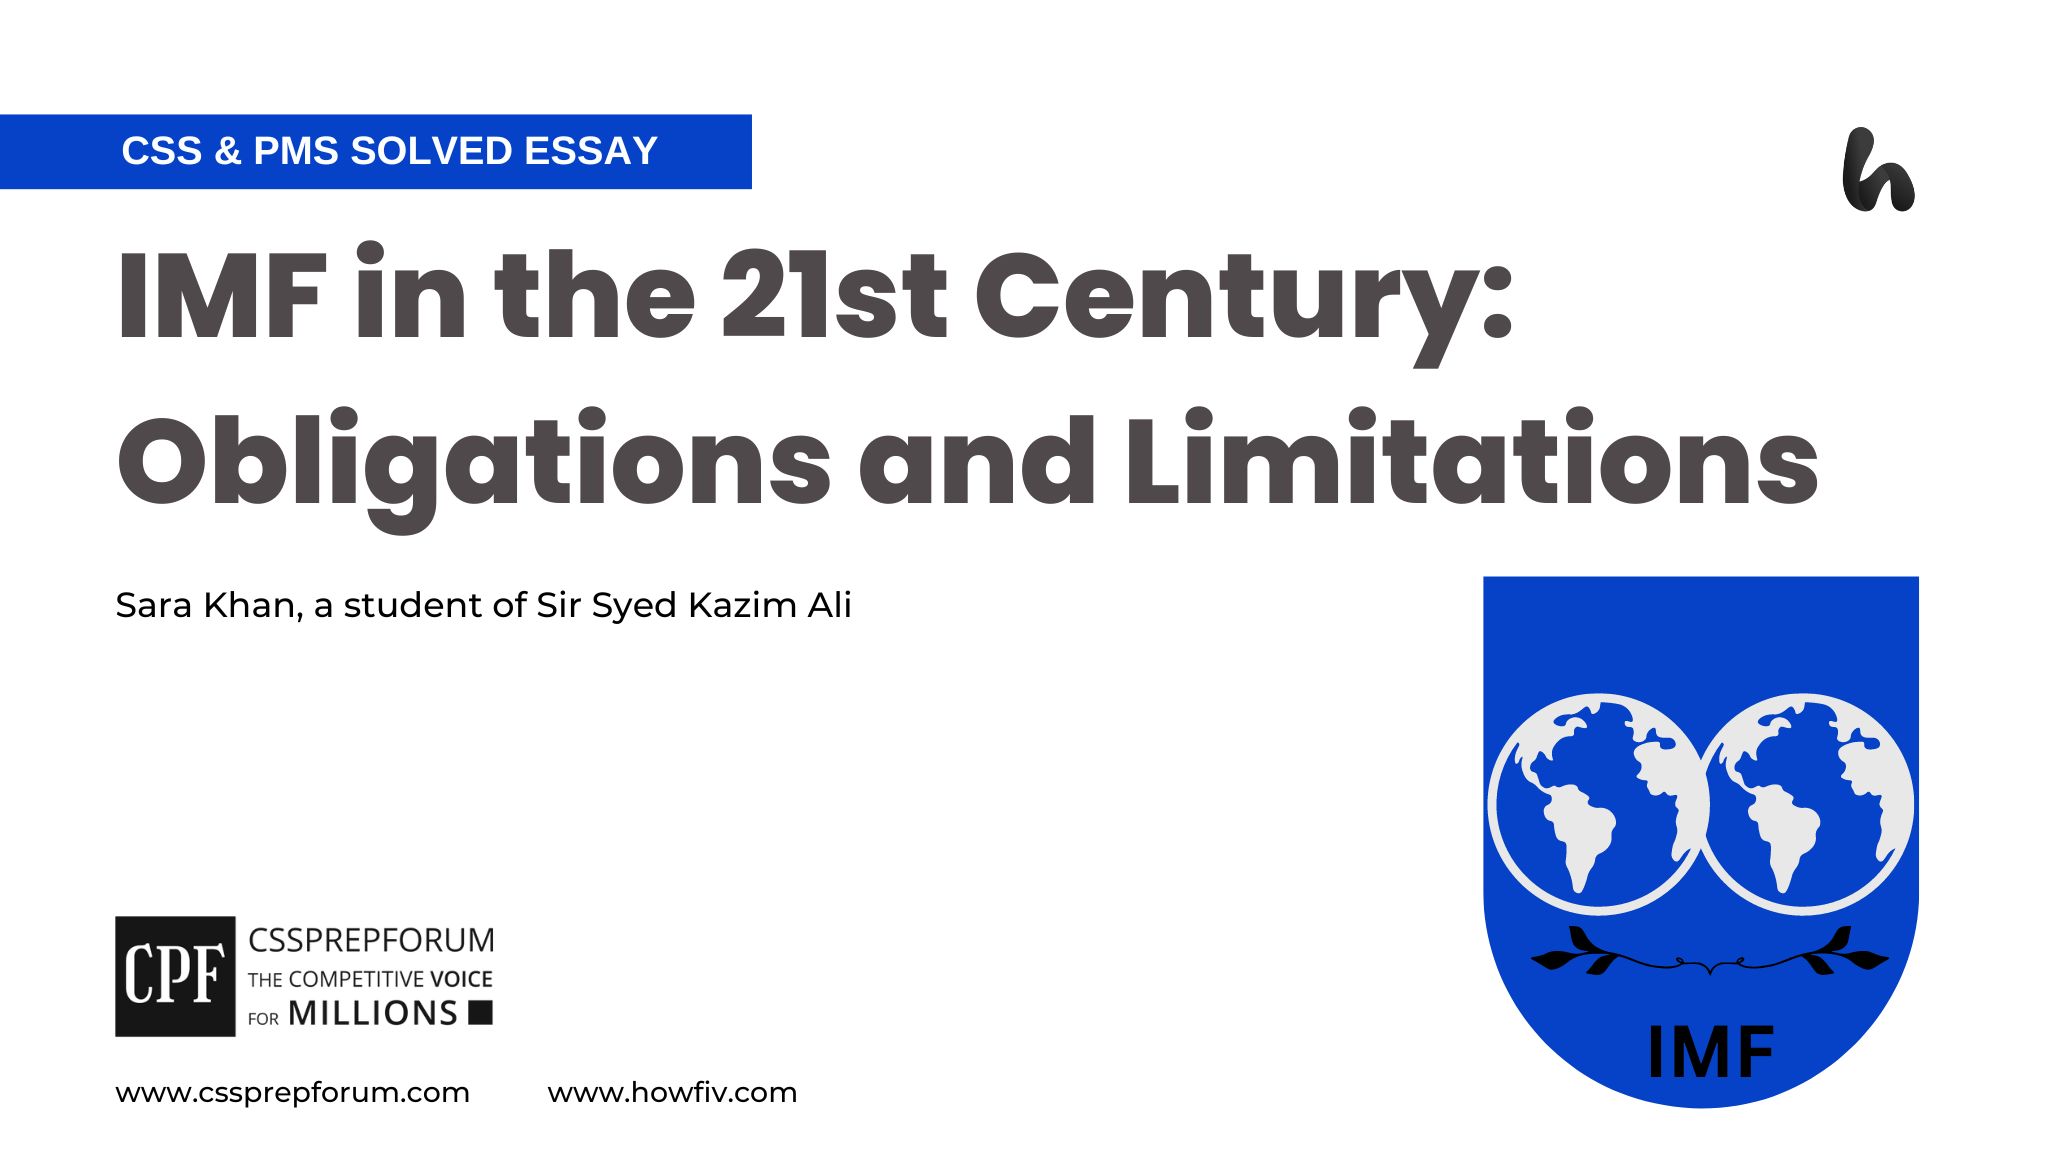 IMF in the 21st Century: Obligations and Limitations by Sara Khan